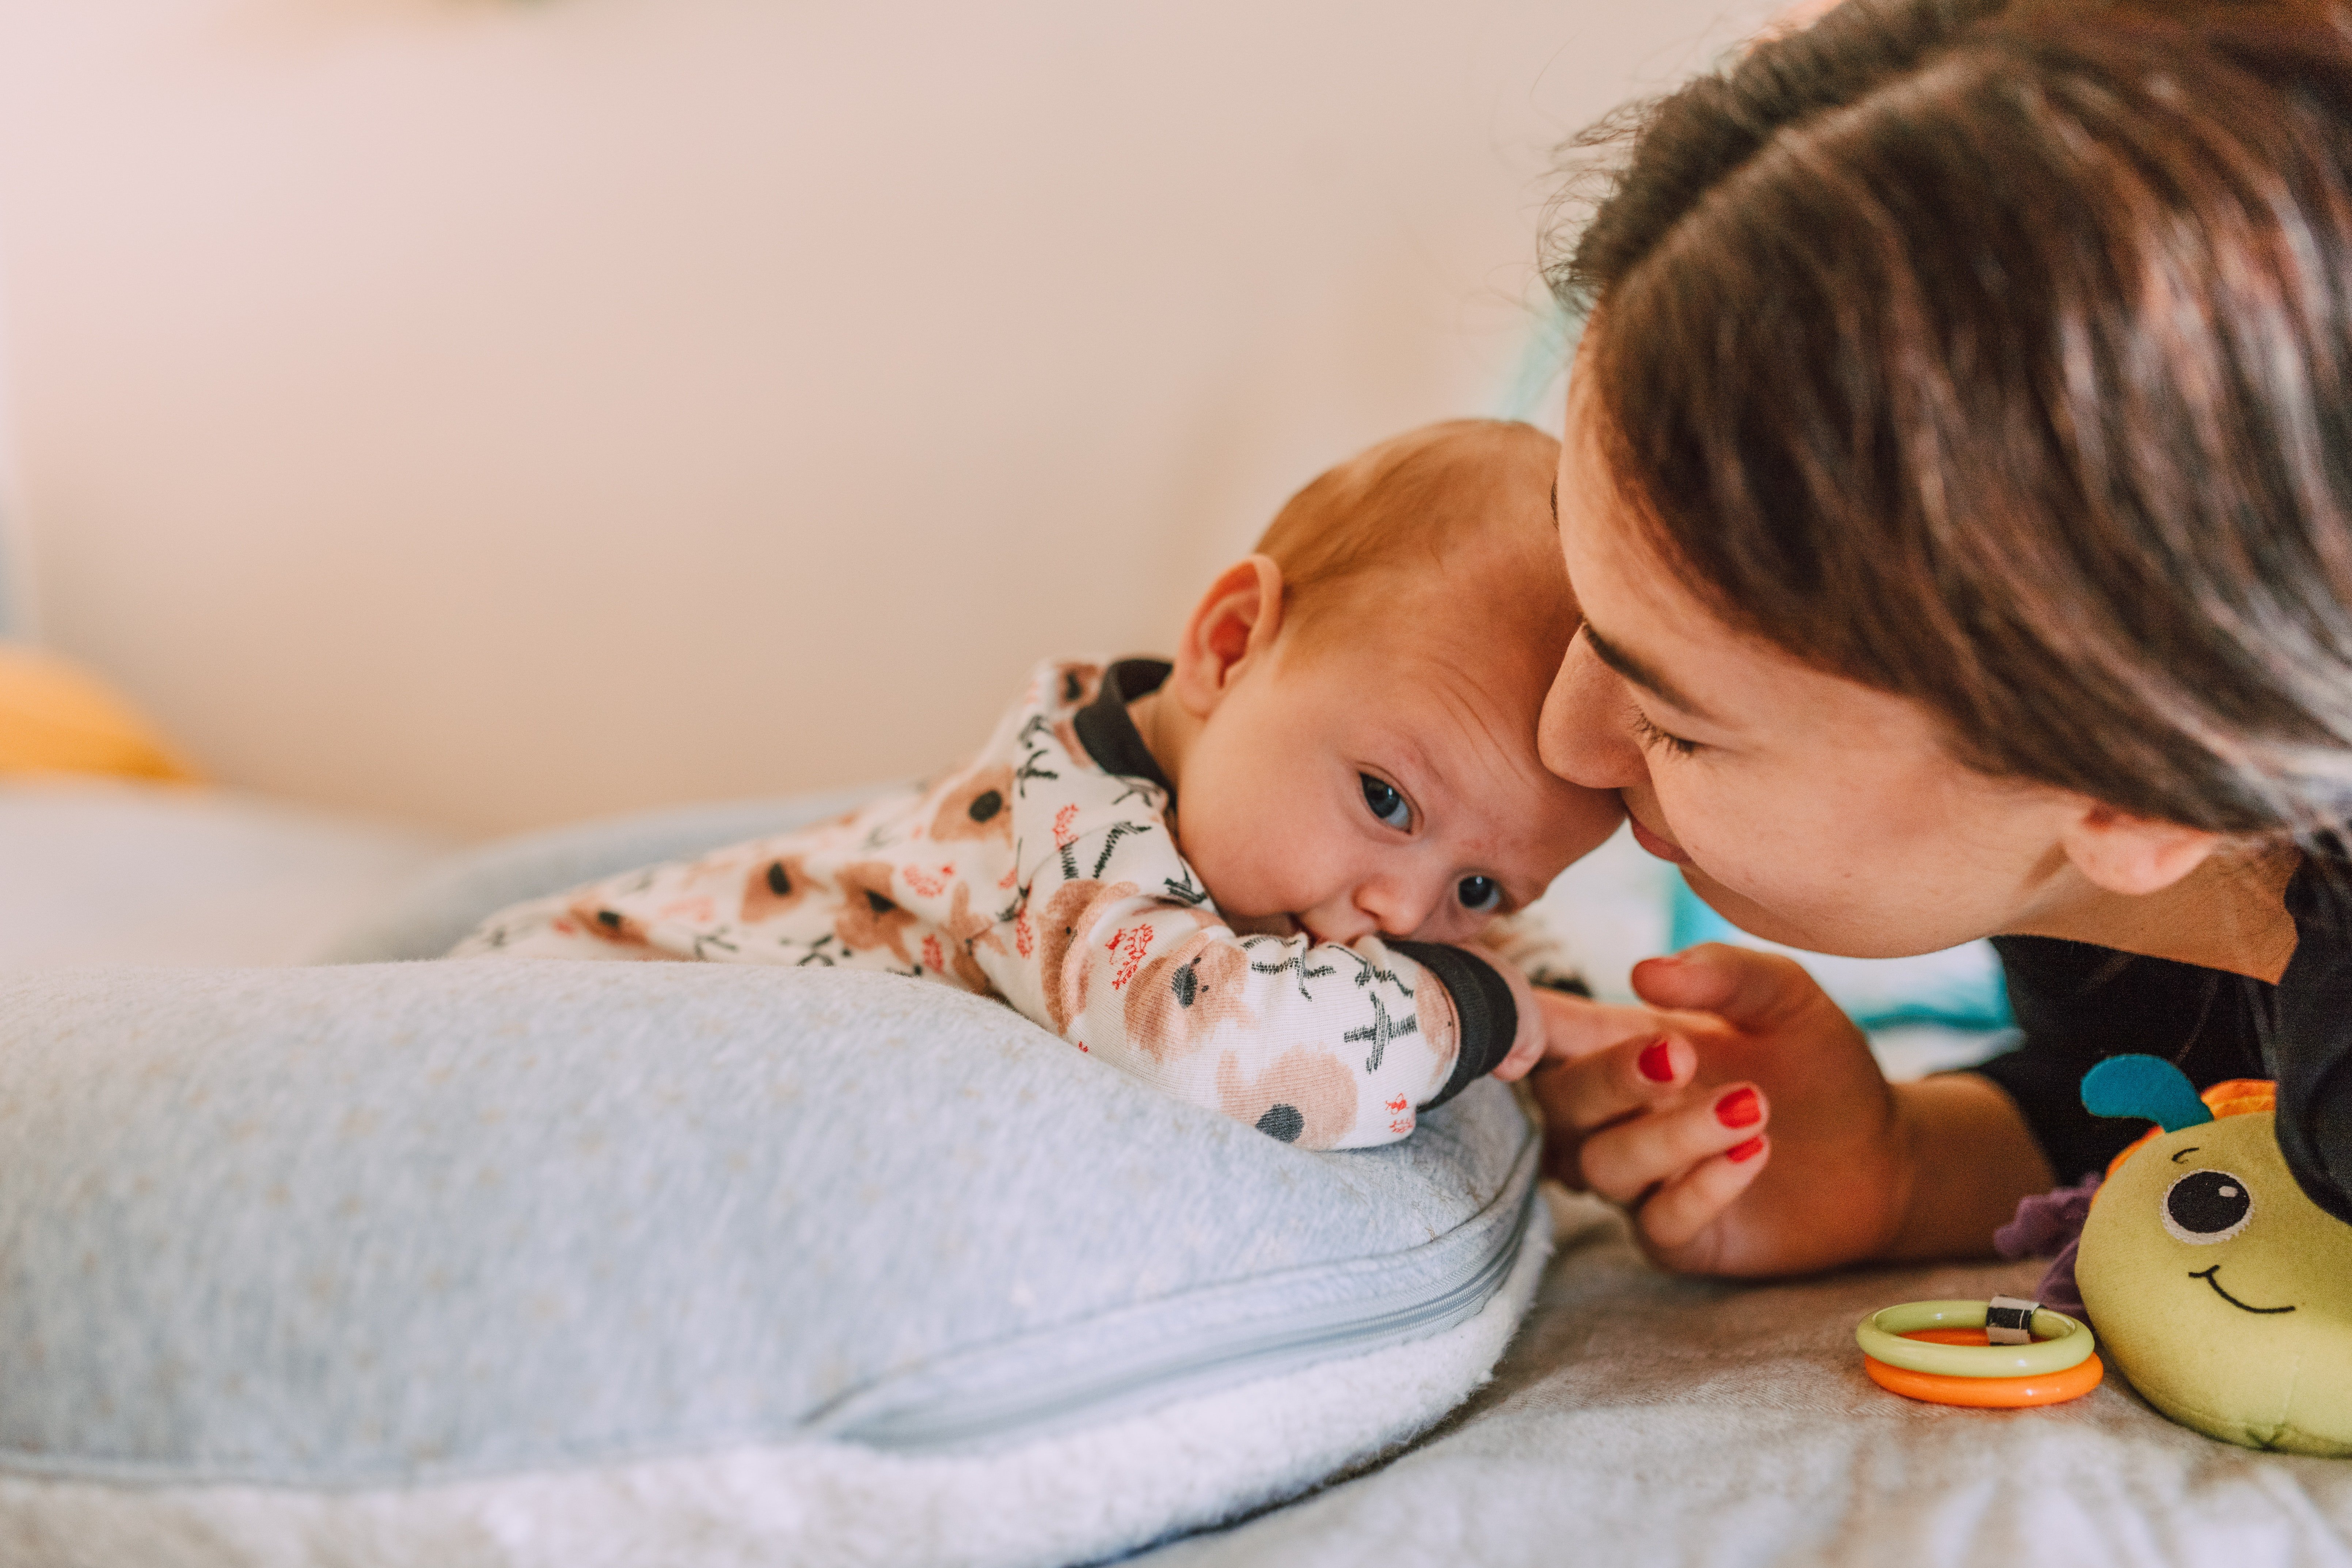 The new nanny's humble & kind attitude blindsided OP | Photo: Pexels 